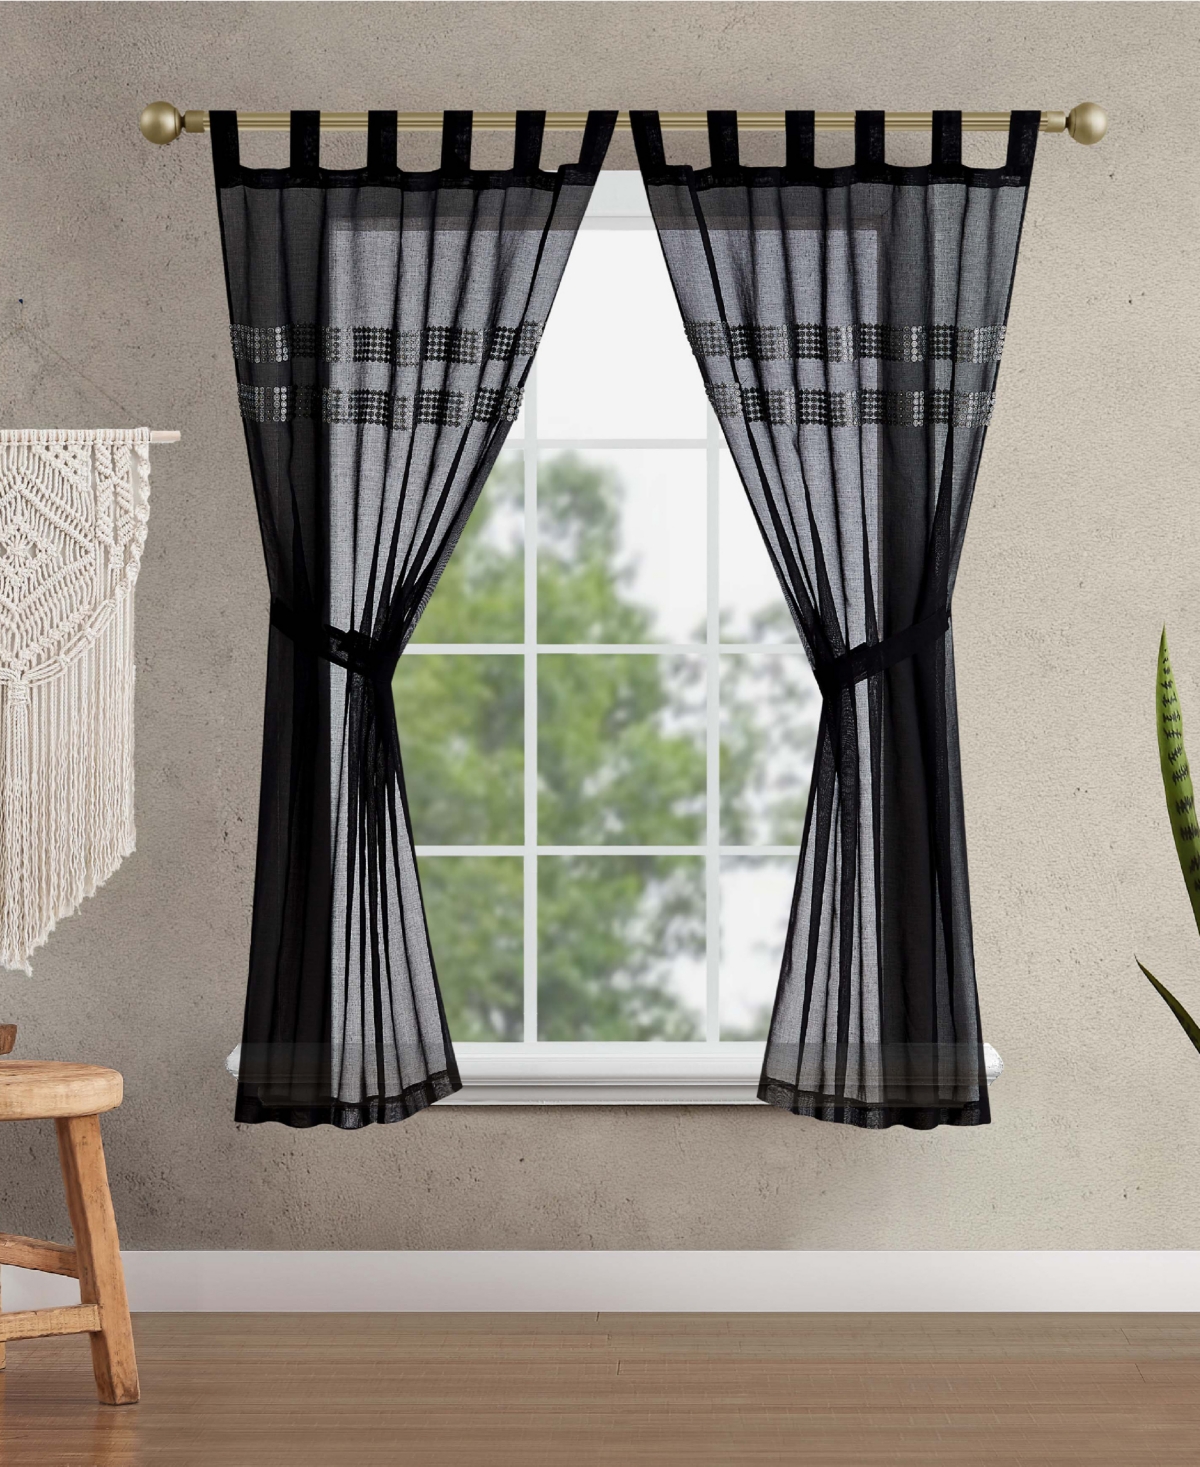 Jessica Simpson Milly Bling Sheer Tab Top Window Curtain Panel Pair With Tiebacks Collection In Black